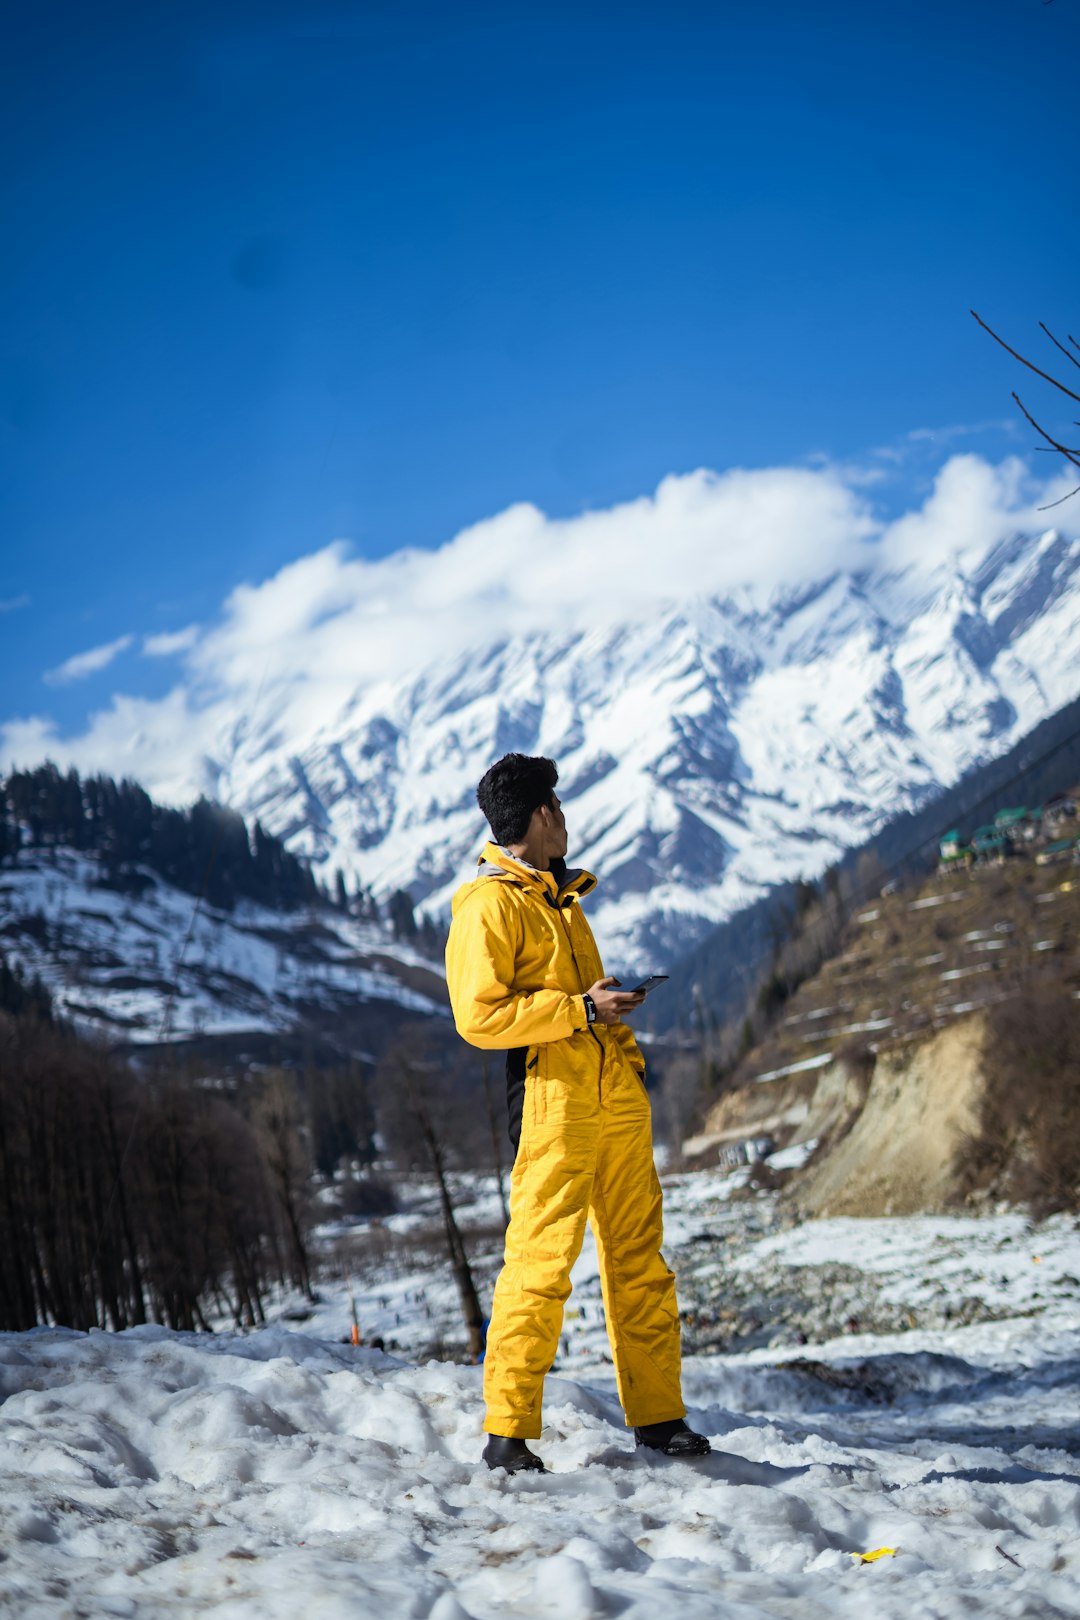 Travel Tips and Stories of Manali in India